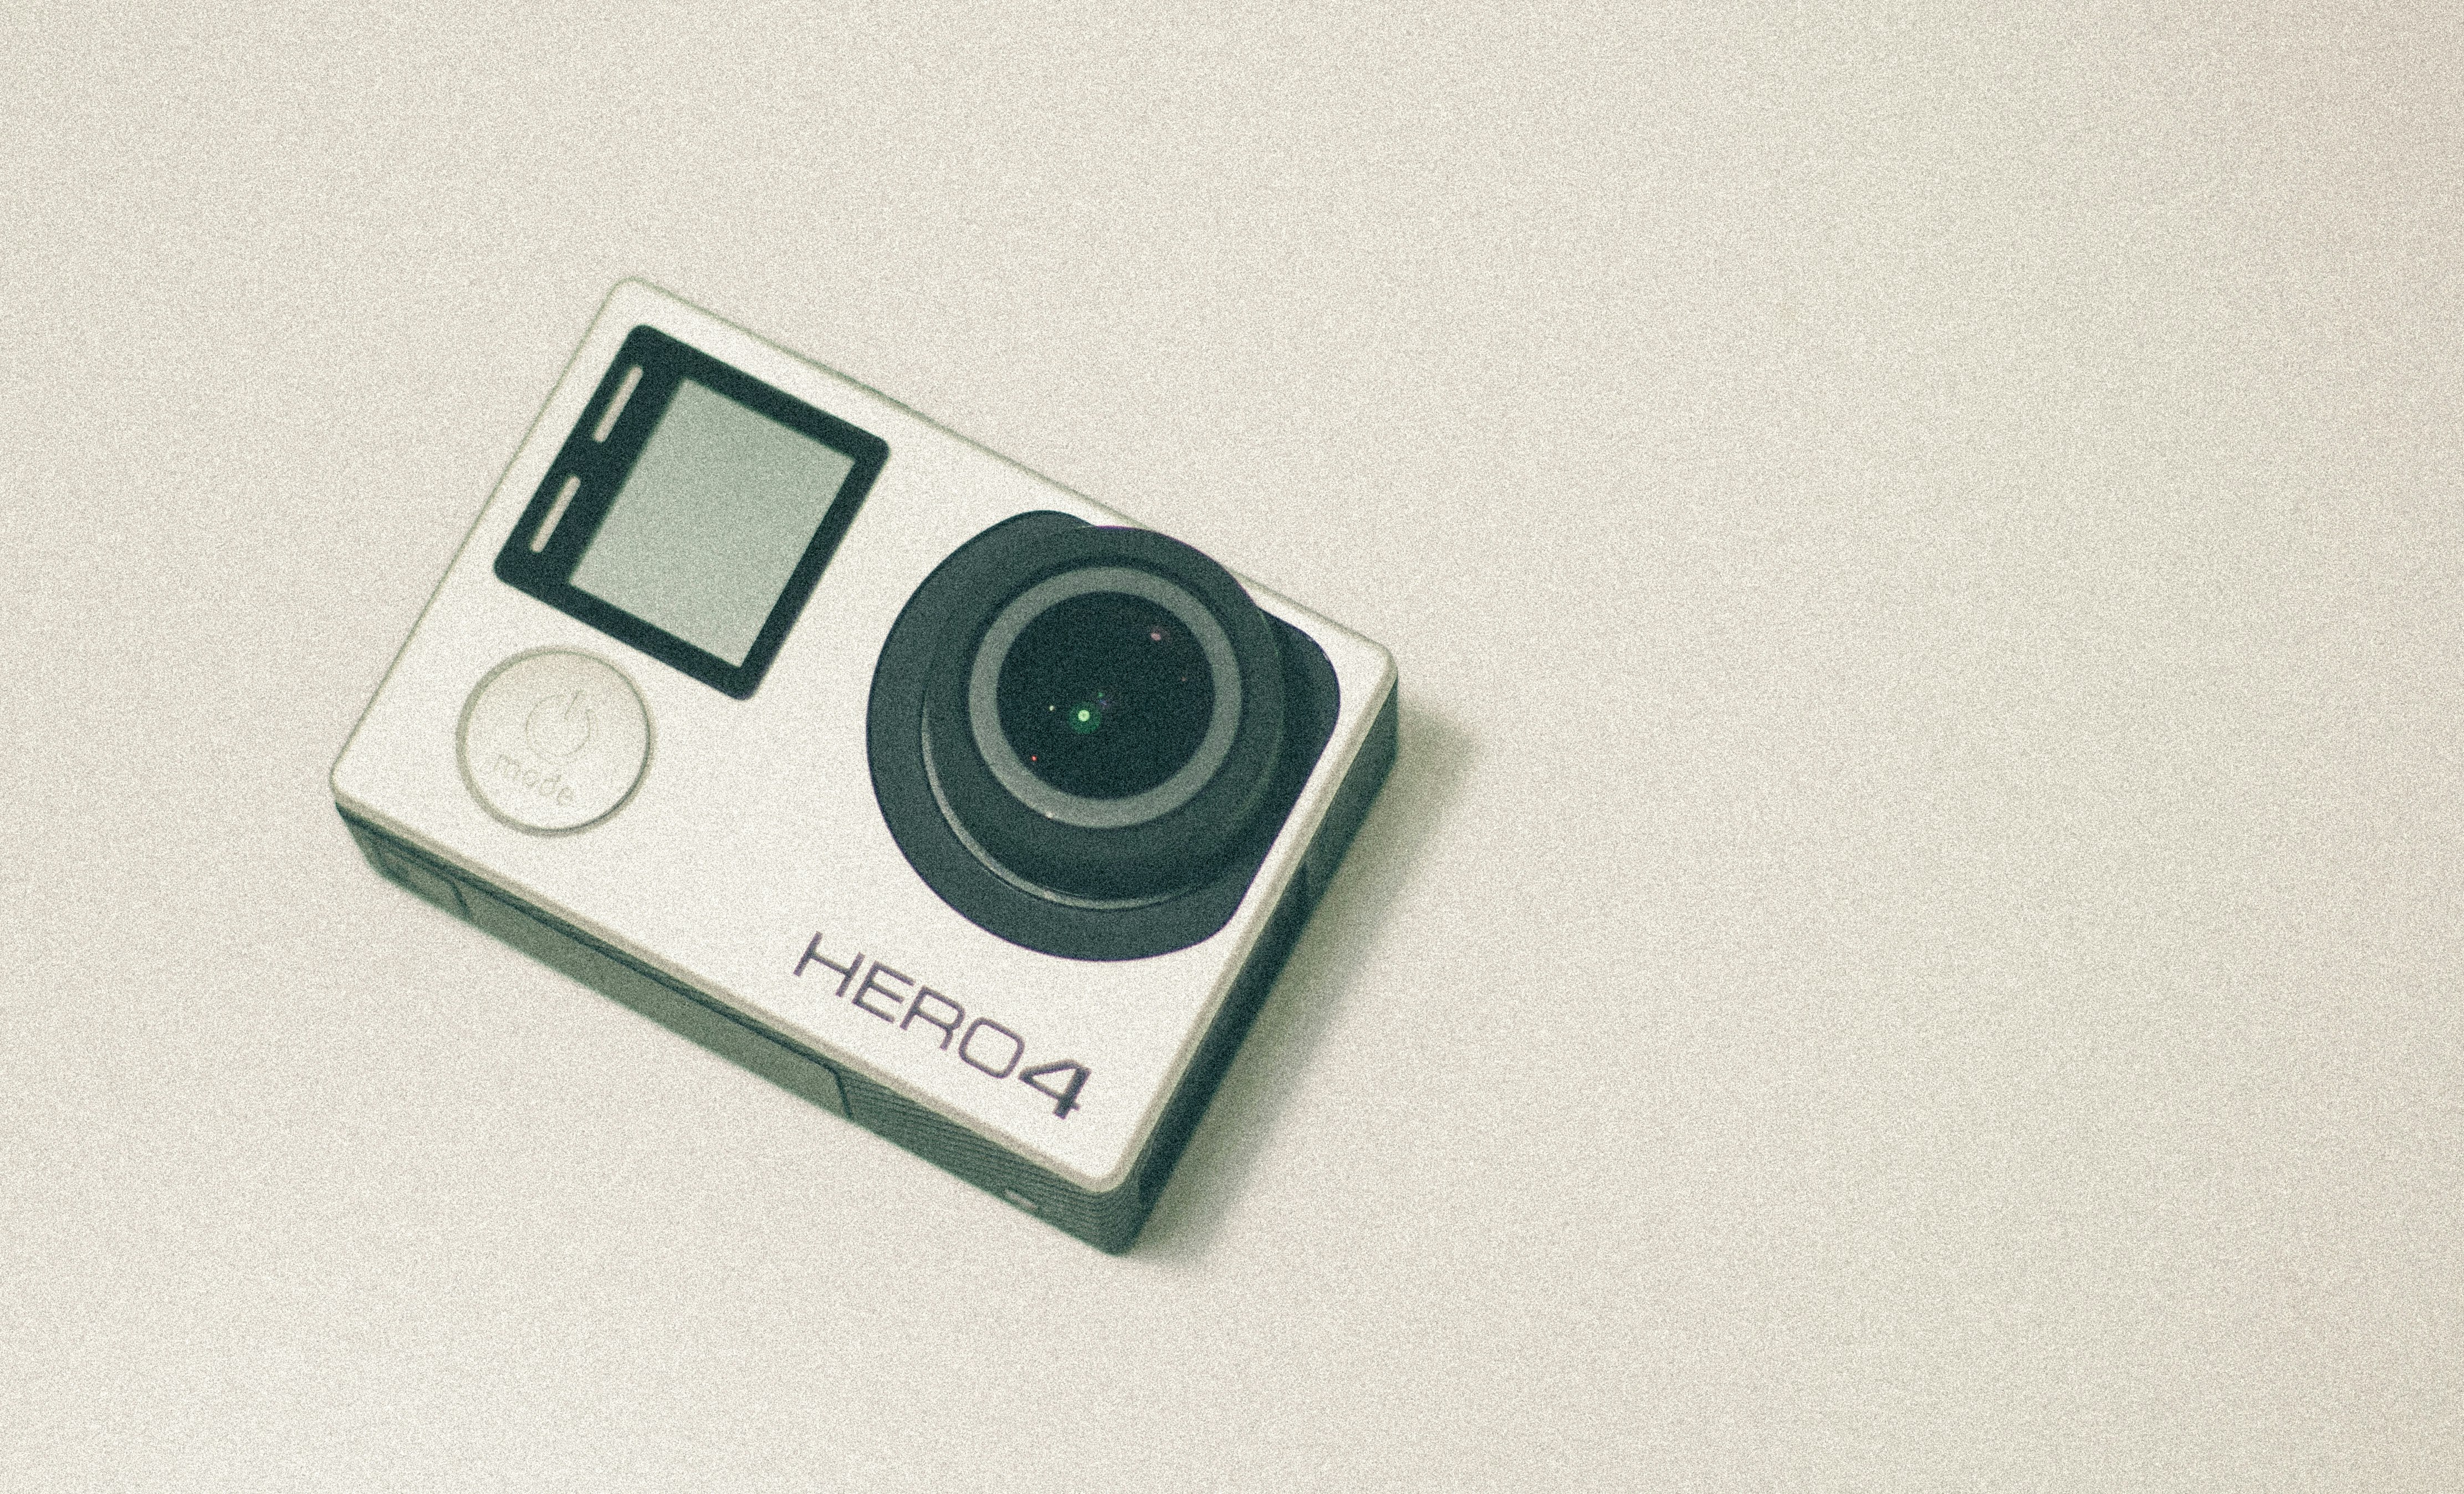 A GoPro Hero4 camera sitting on a white surface.